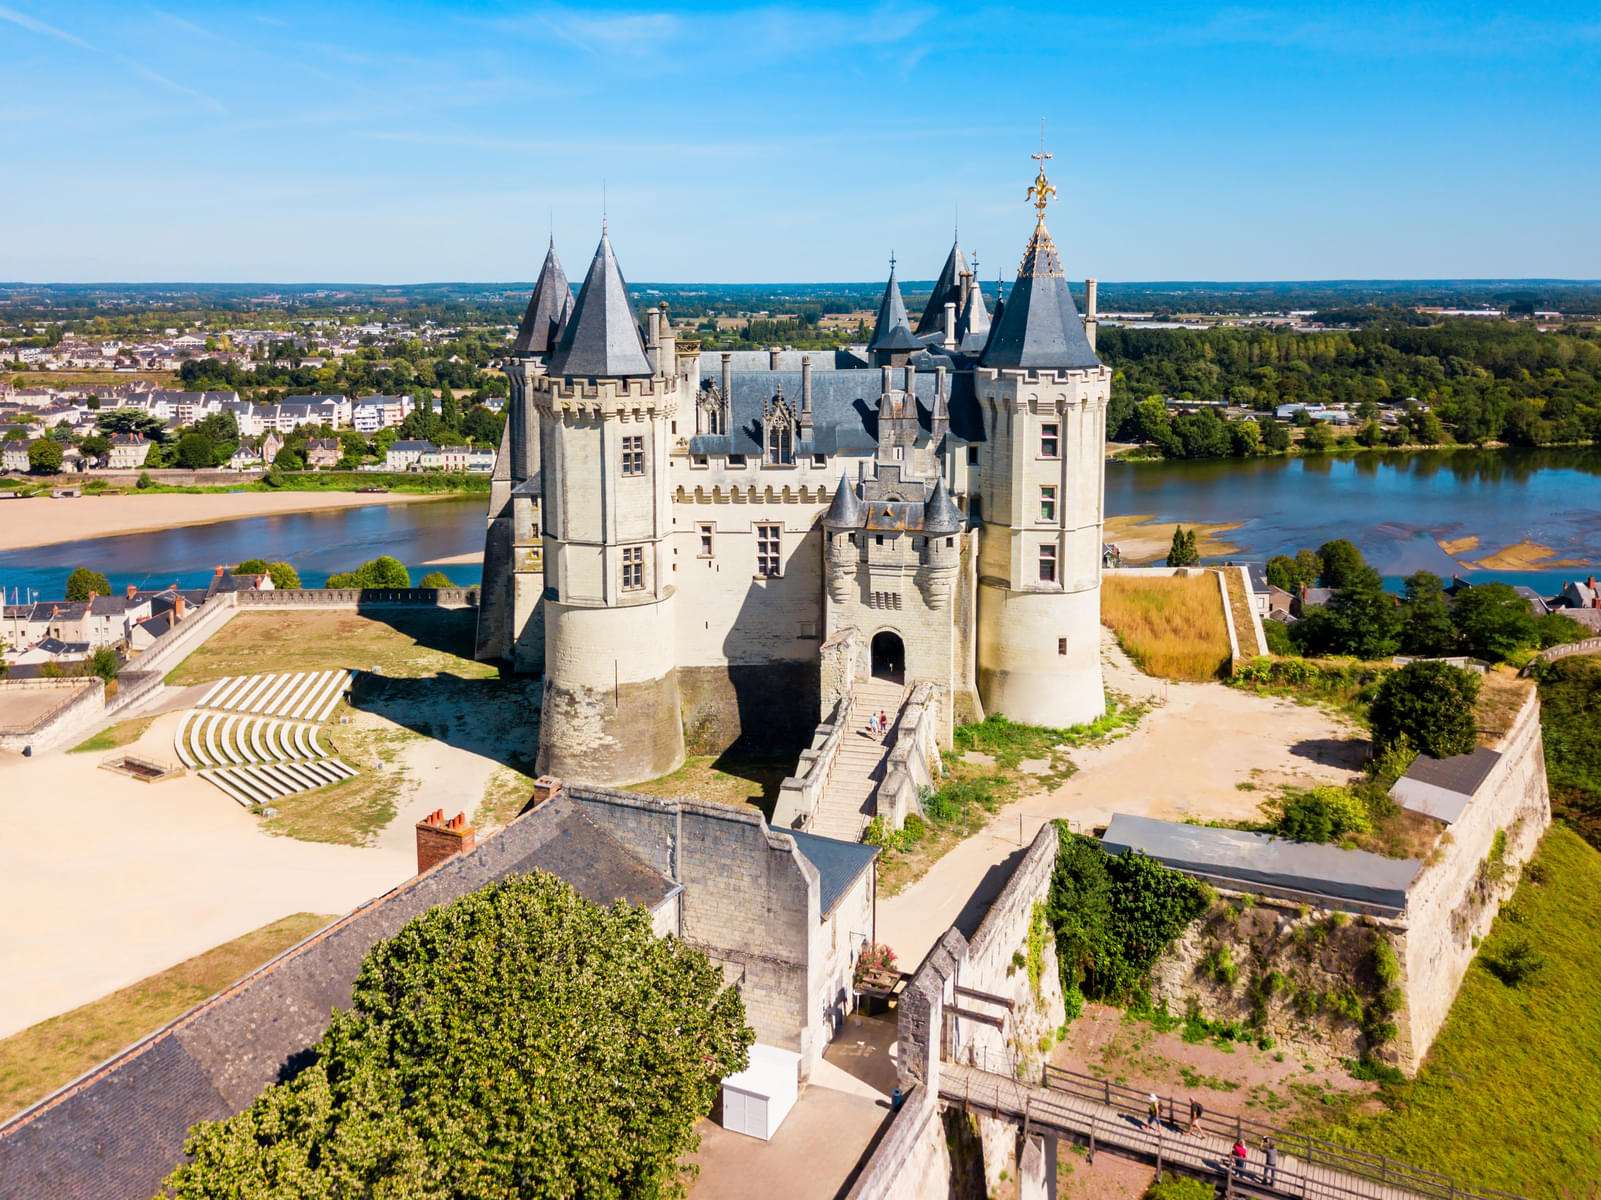 Know Before You Go At Chateau de Saumur